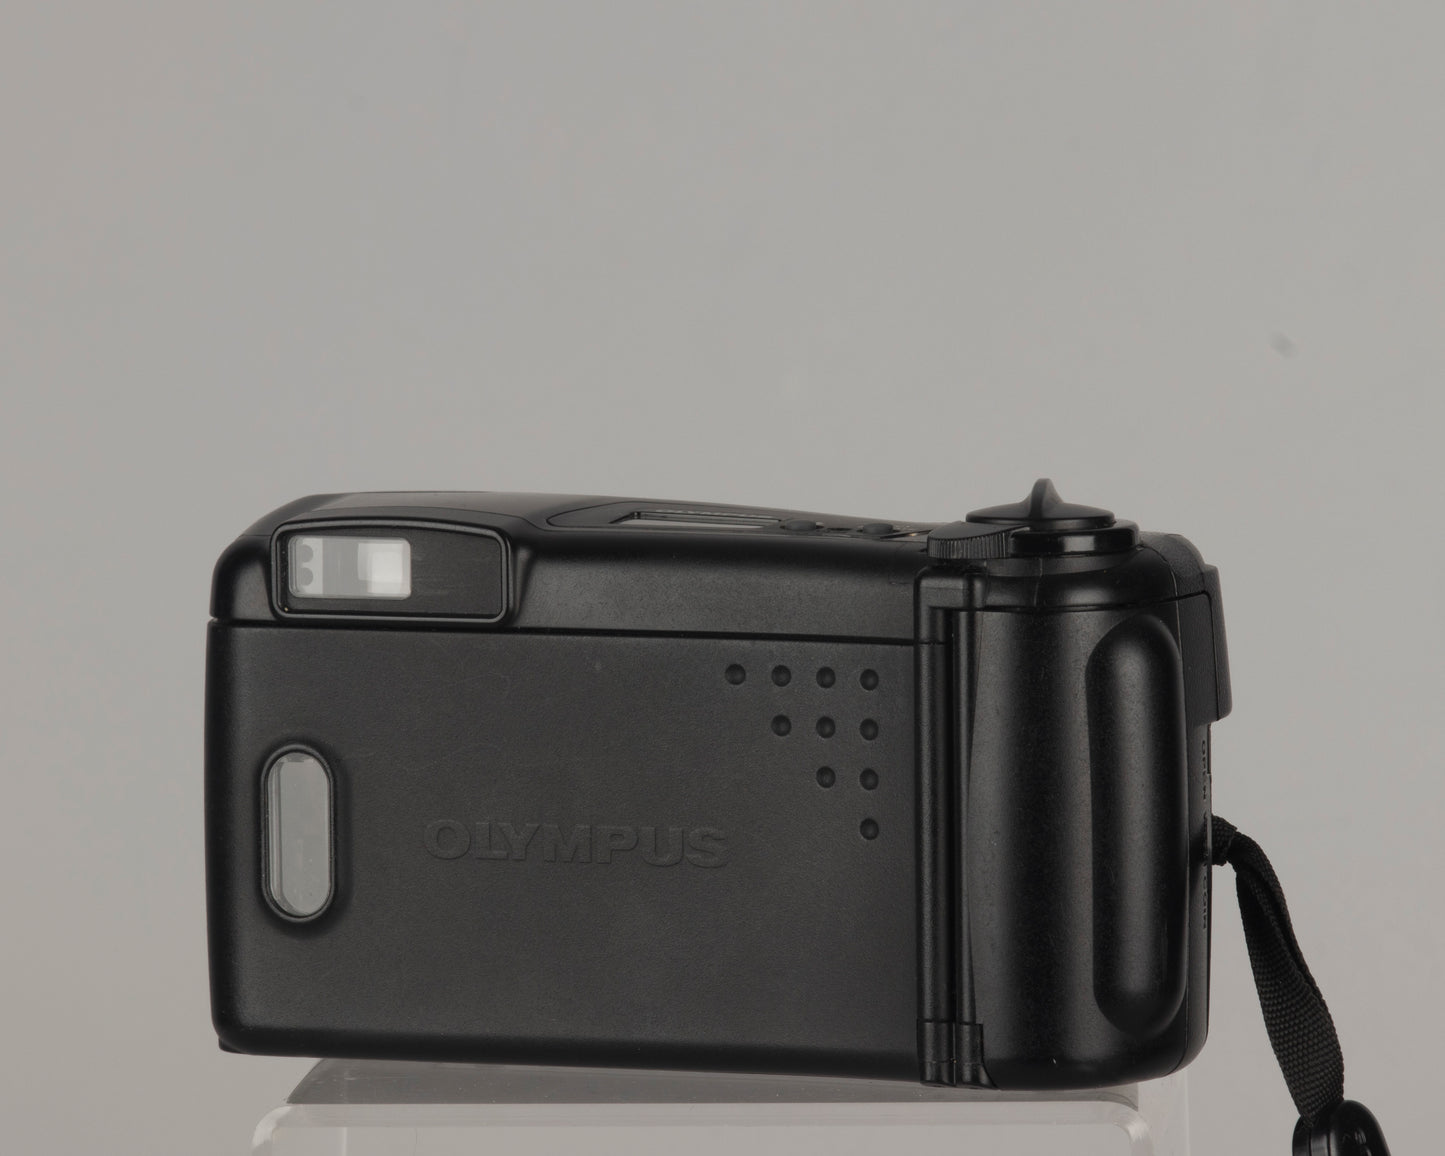 Olympus Infinity Accura Zoom 80 35mm camera with case